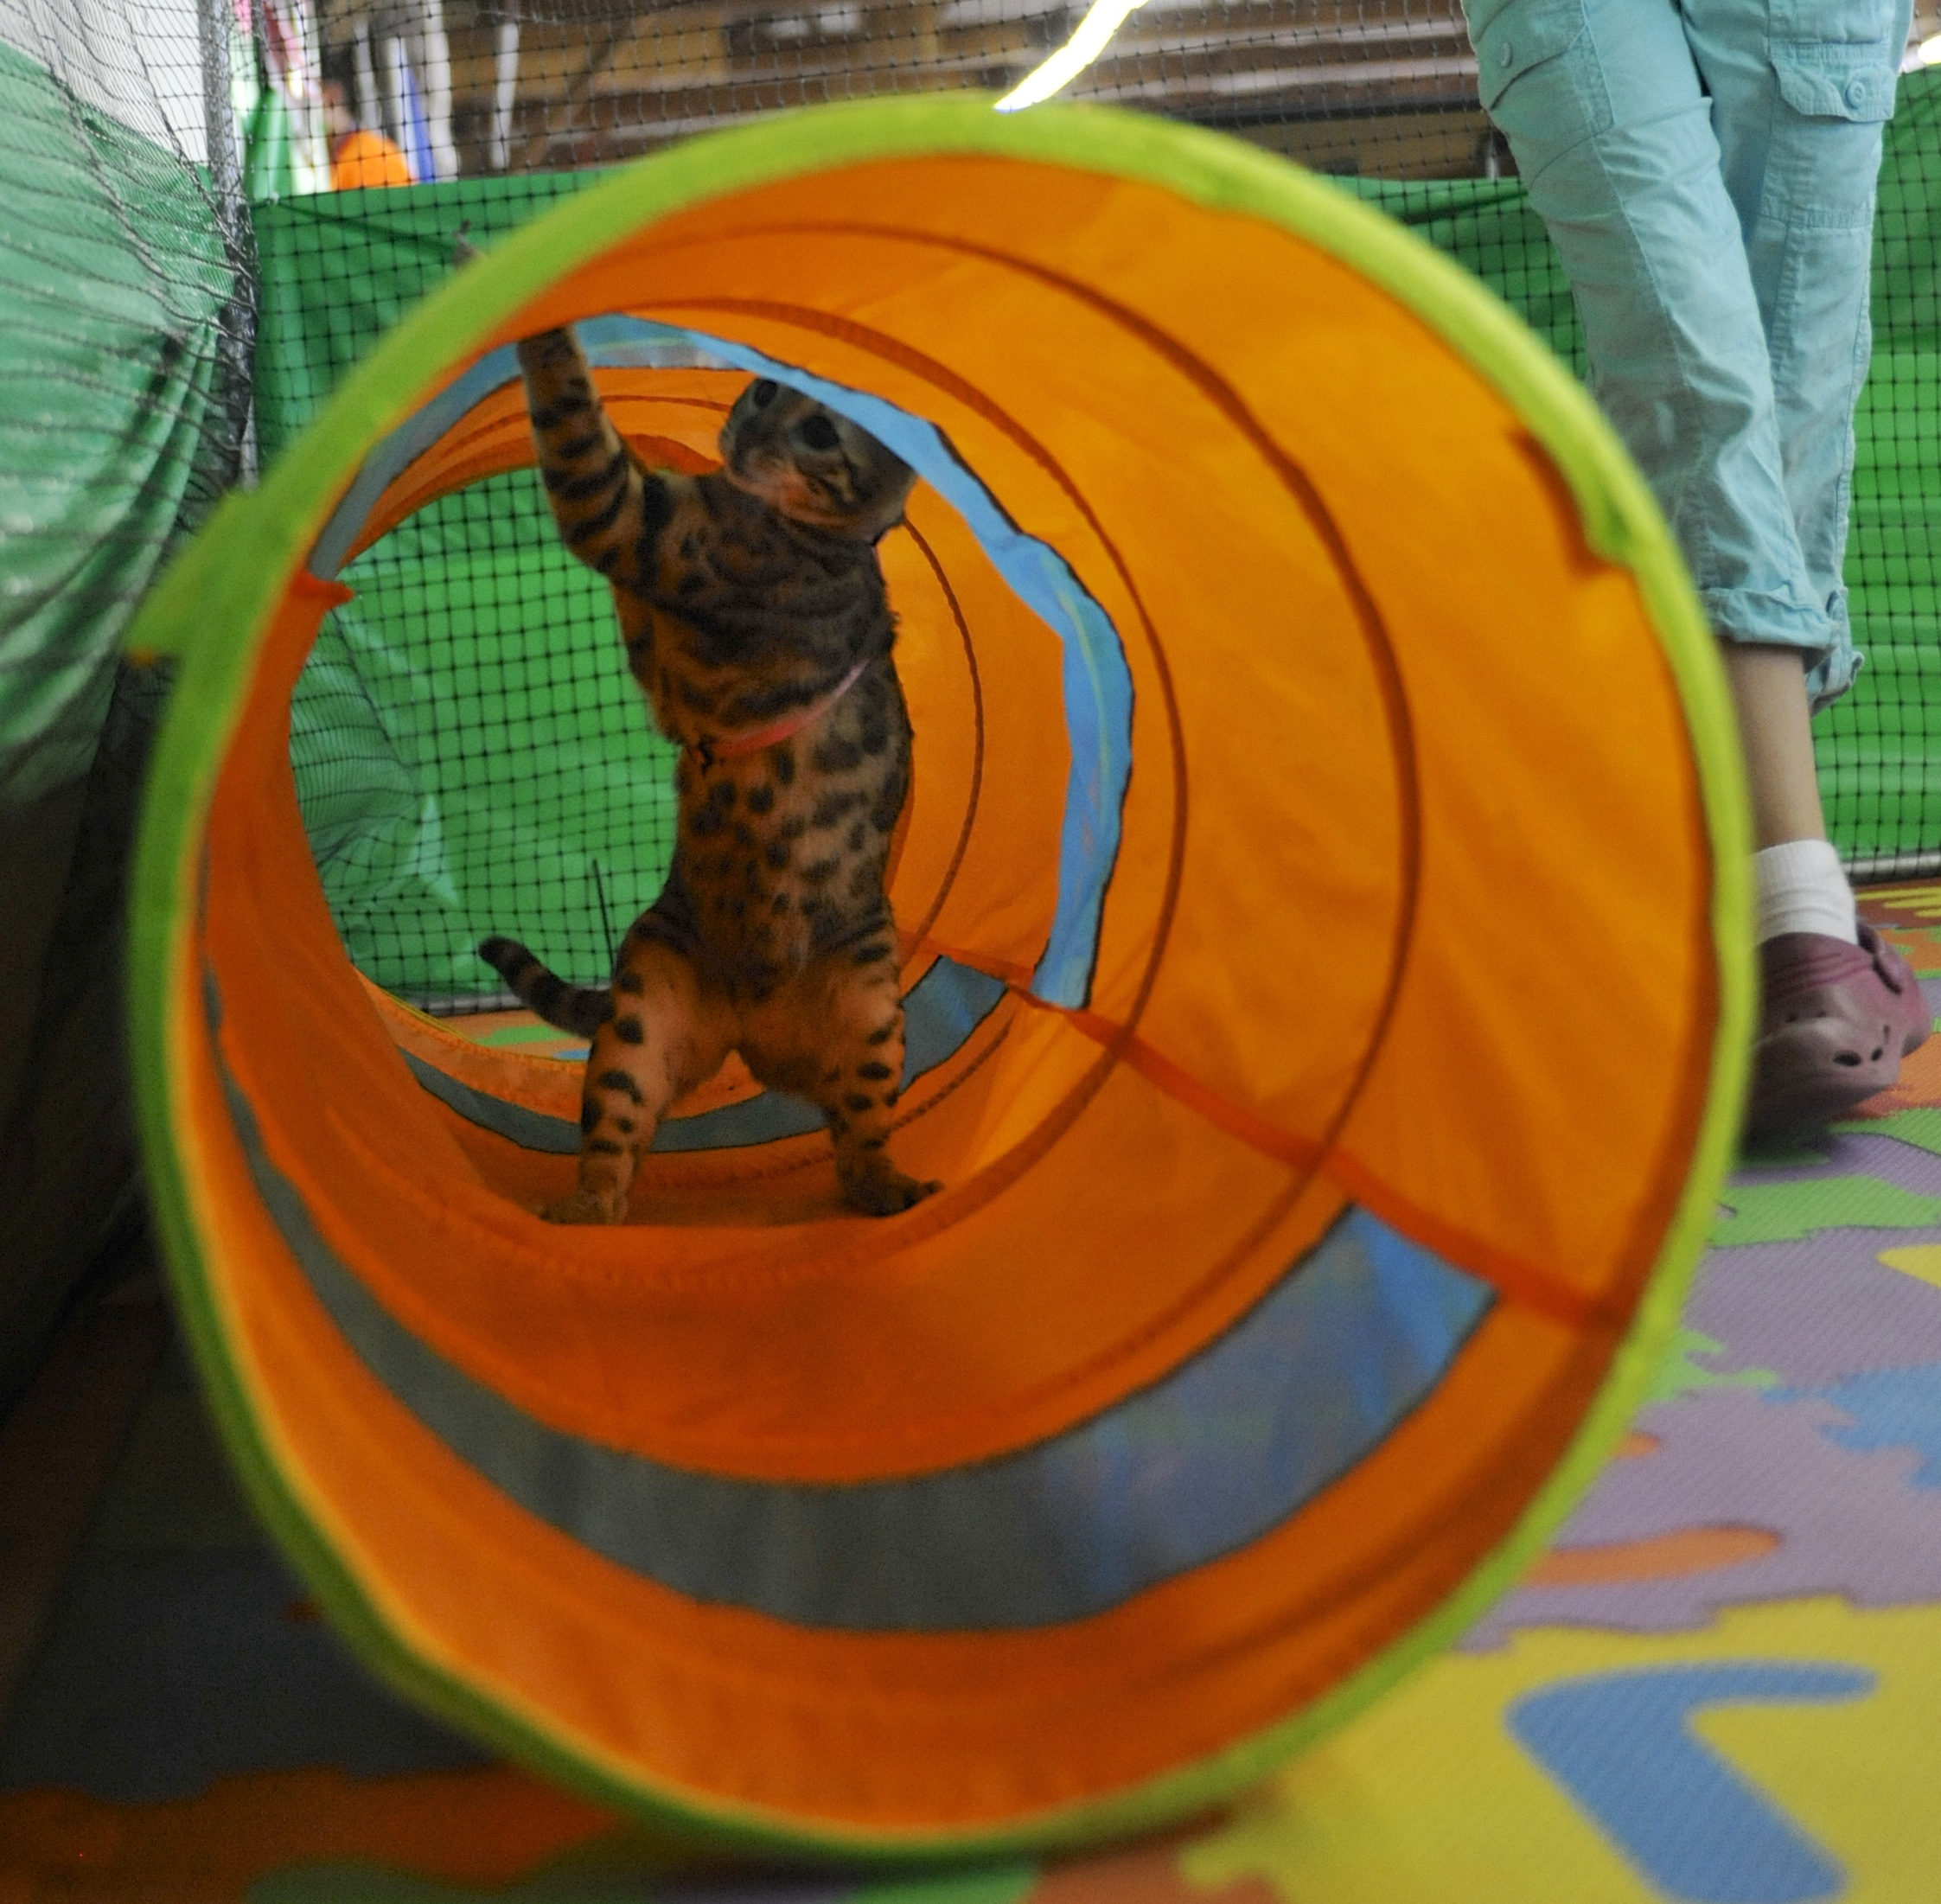 Heather Christenson puts 'Star' through his paces at the 4-H cat agility contest at the Clark County Fair in Battleground, Wa., Sunday August 7, 2016.